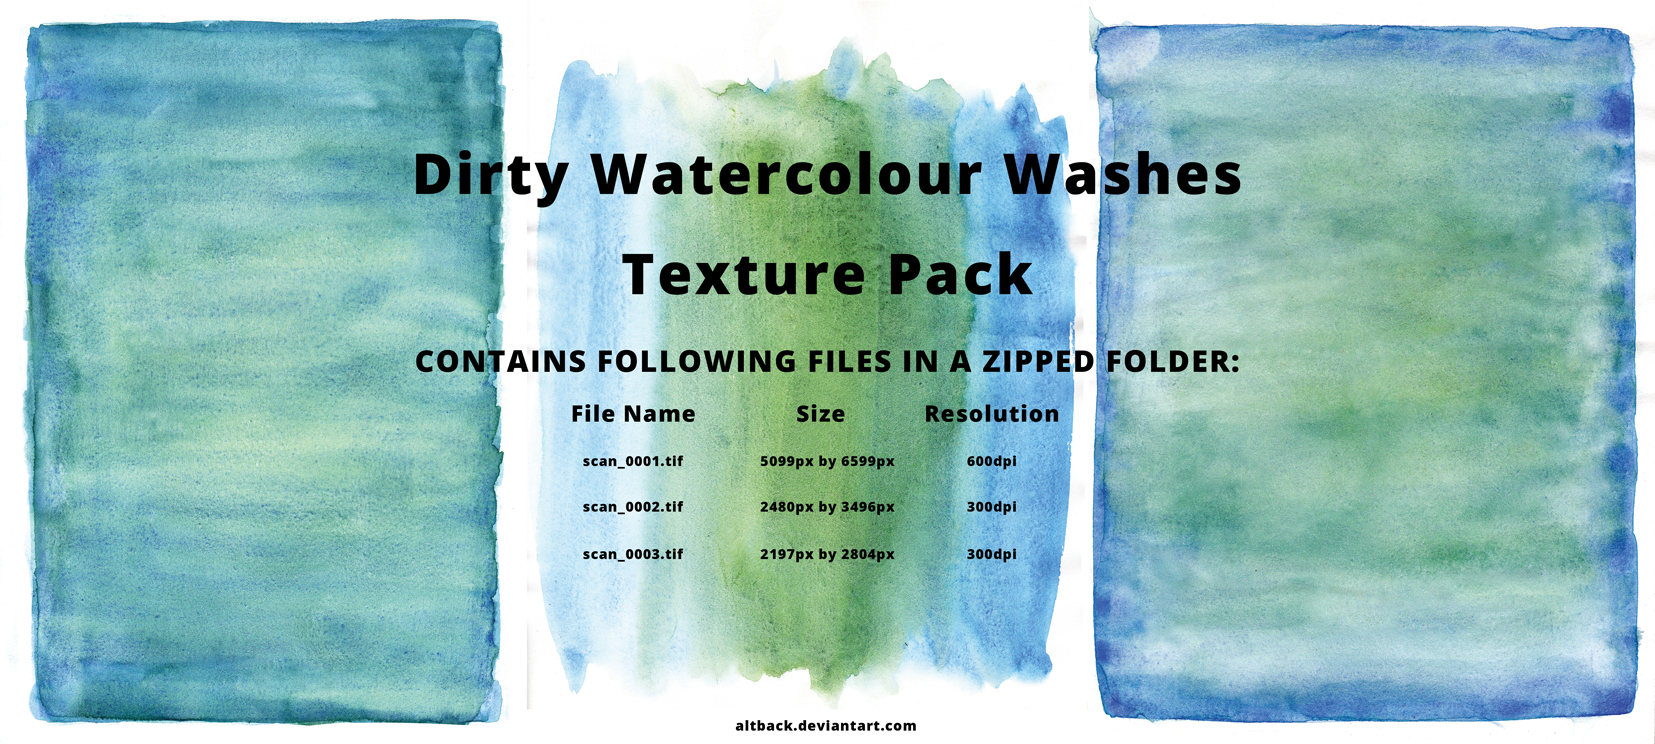 dirty watercolour washes texture pack by altback